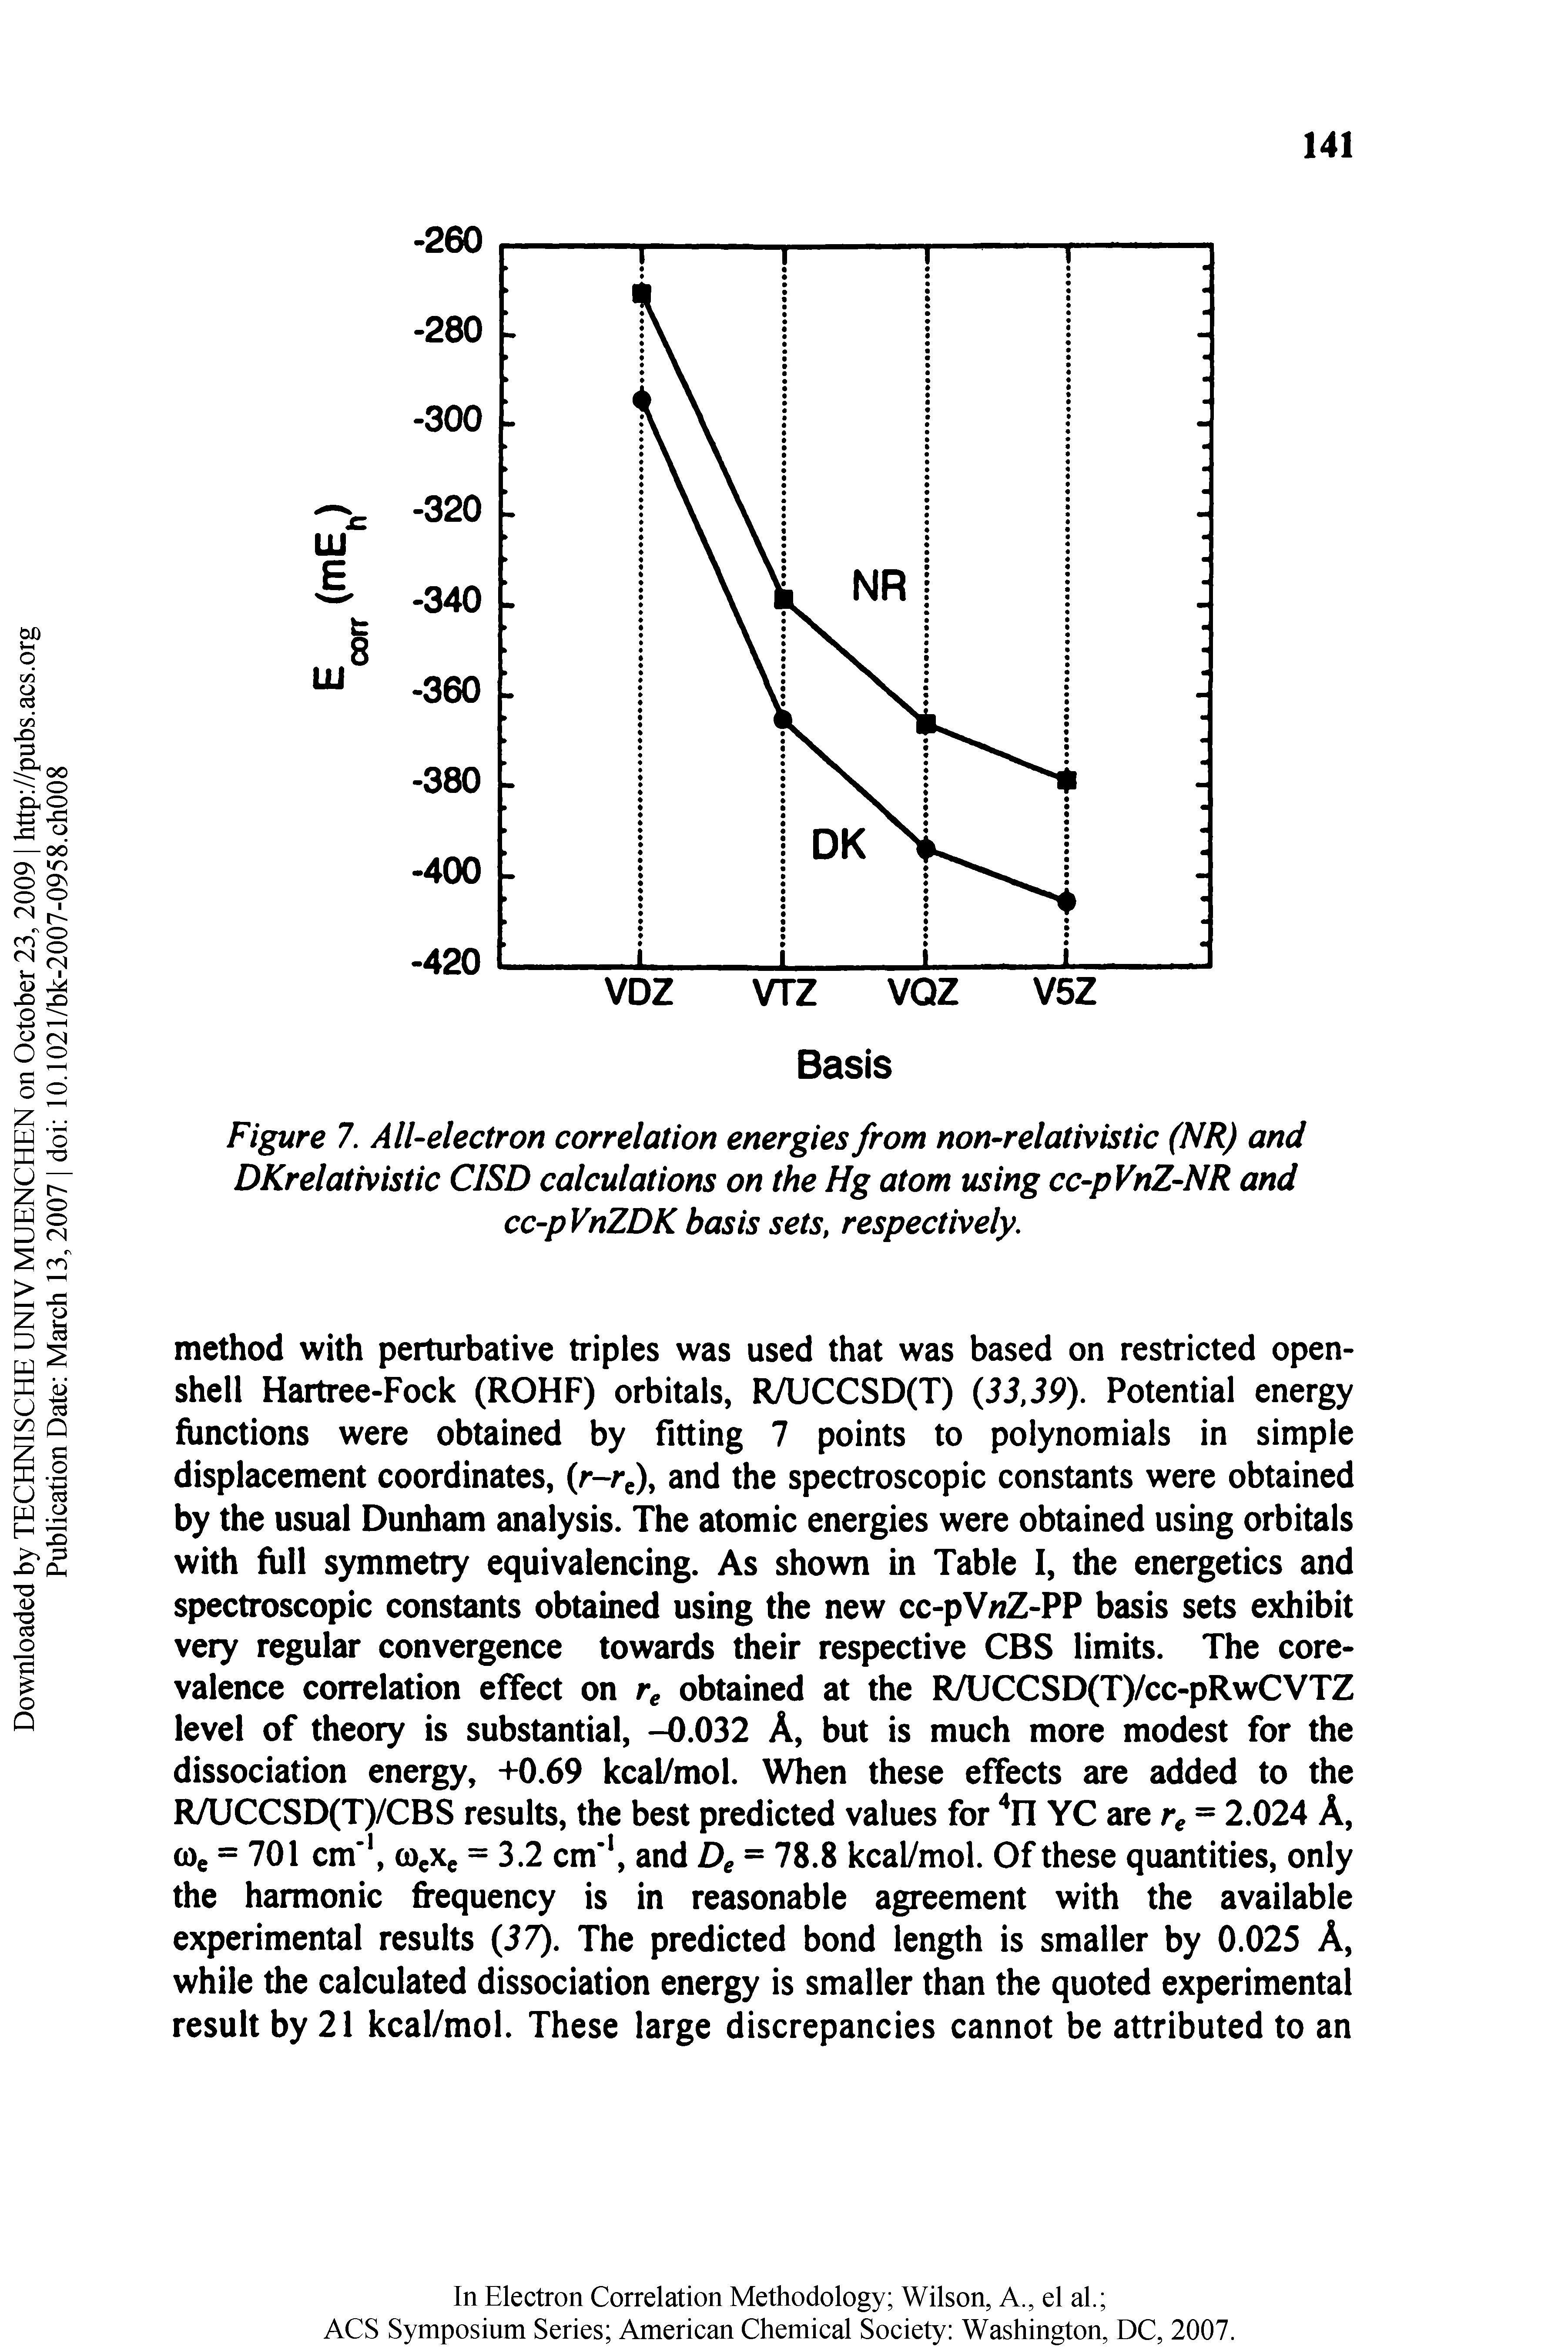 Figure 7. All-electron correlation energies from non-relativistic (NR) and DKrelativistic CISD calculations on the Hg atom using cc-pVnZ-NR and cc-pVnZDK basis sets, respectively.